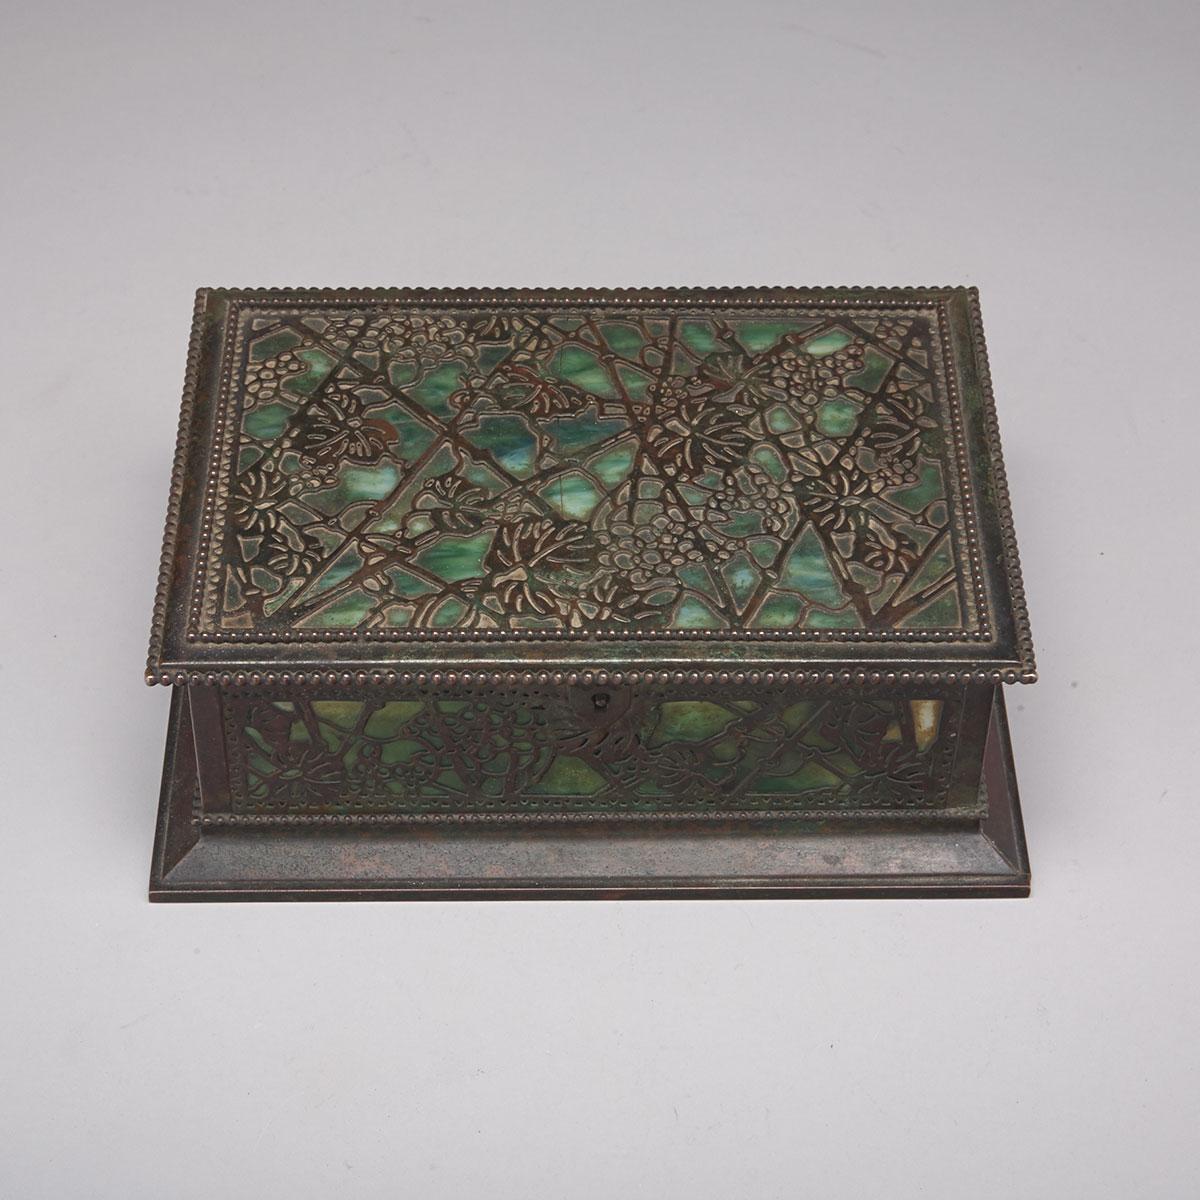 Tiffany Studios, New York, Etched Metal and Glass Grapevine Pattern Humidor, c.1919